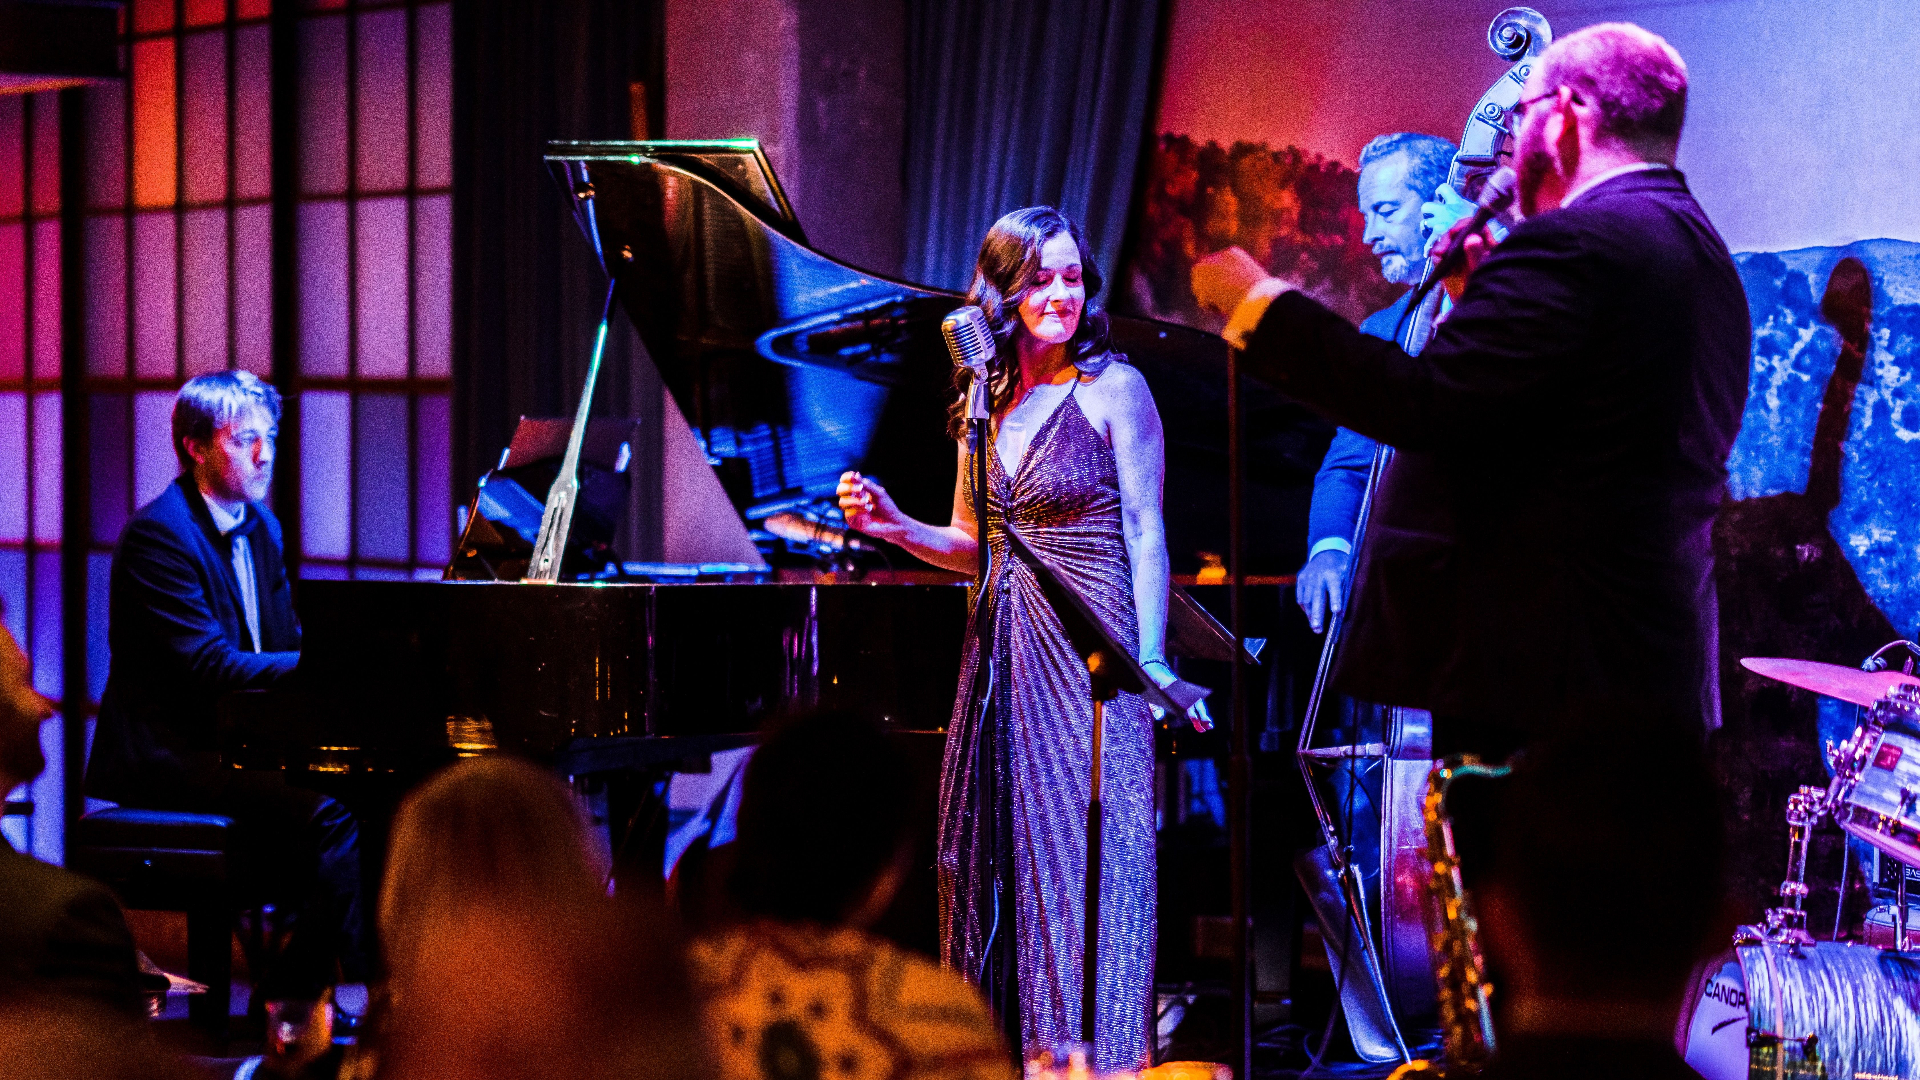 Pianist with two vocalist and one instrumentalist on stage under purple and red lights.